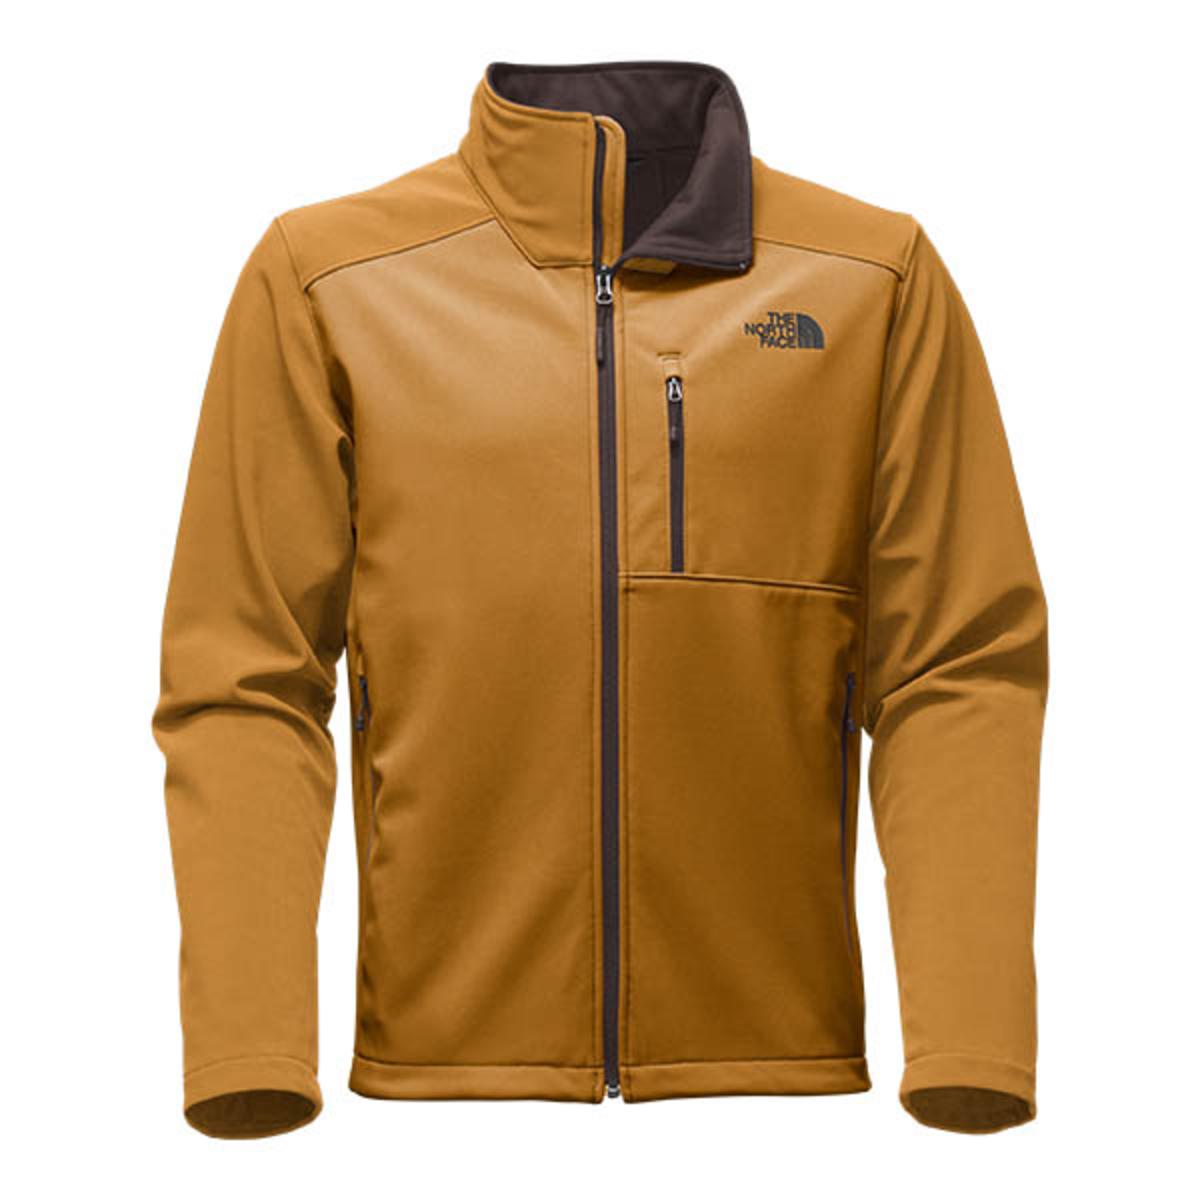 north face apex 2 bionic jacket